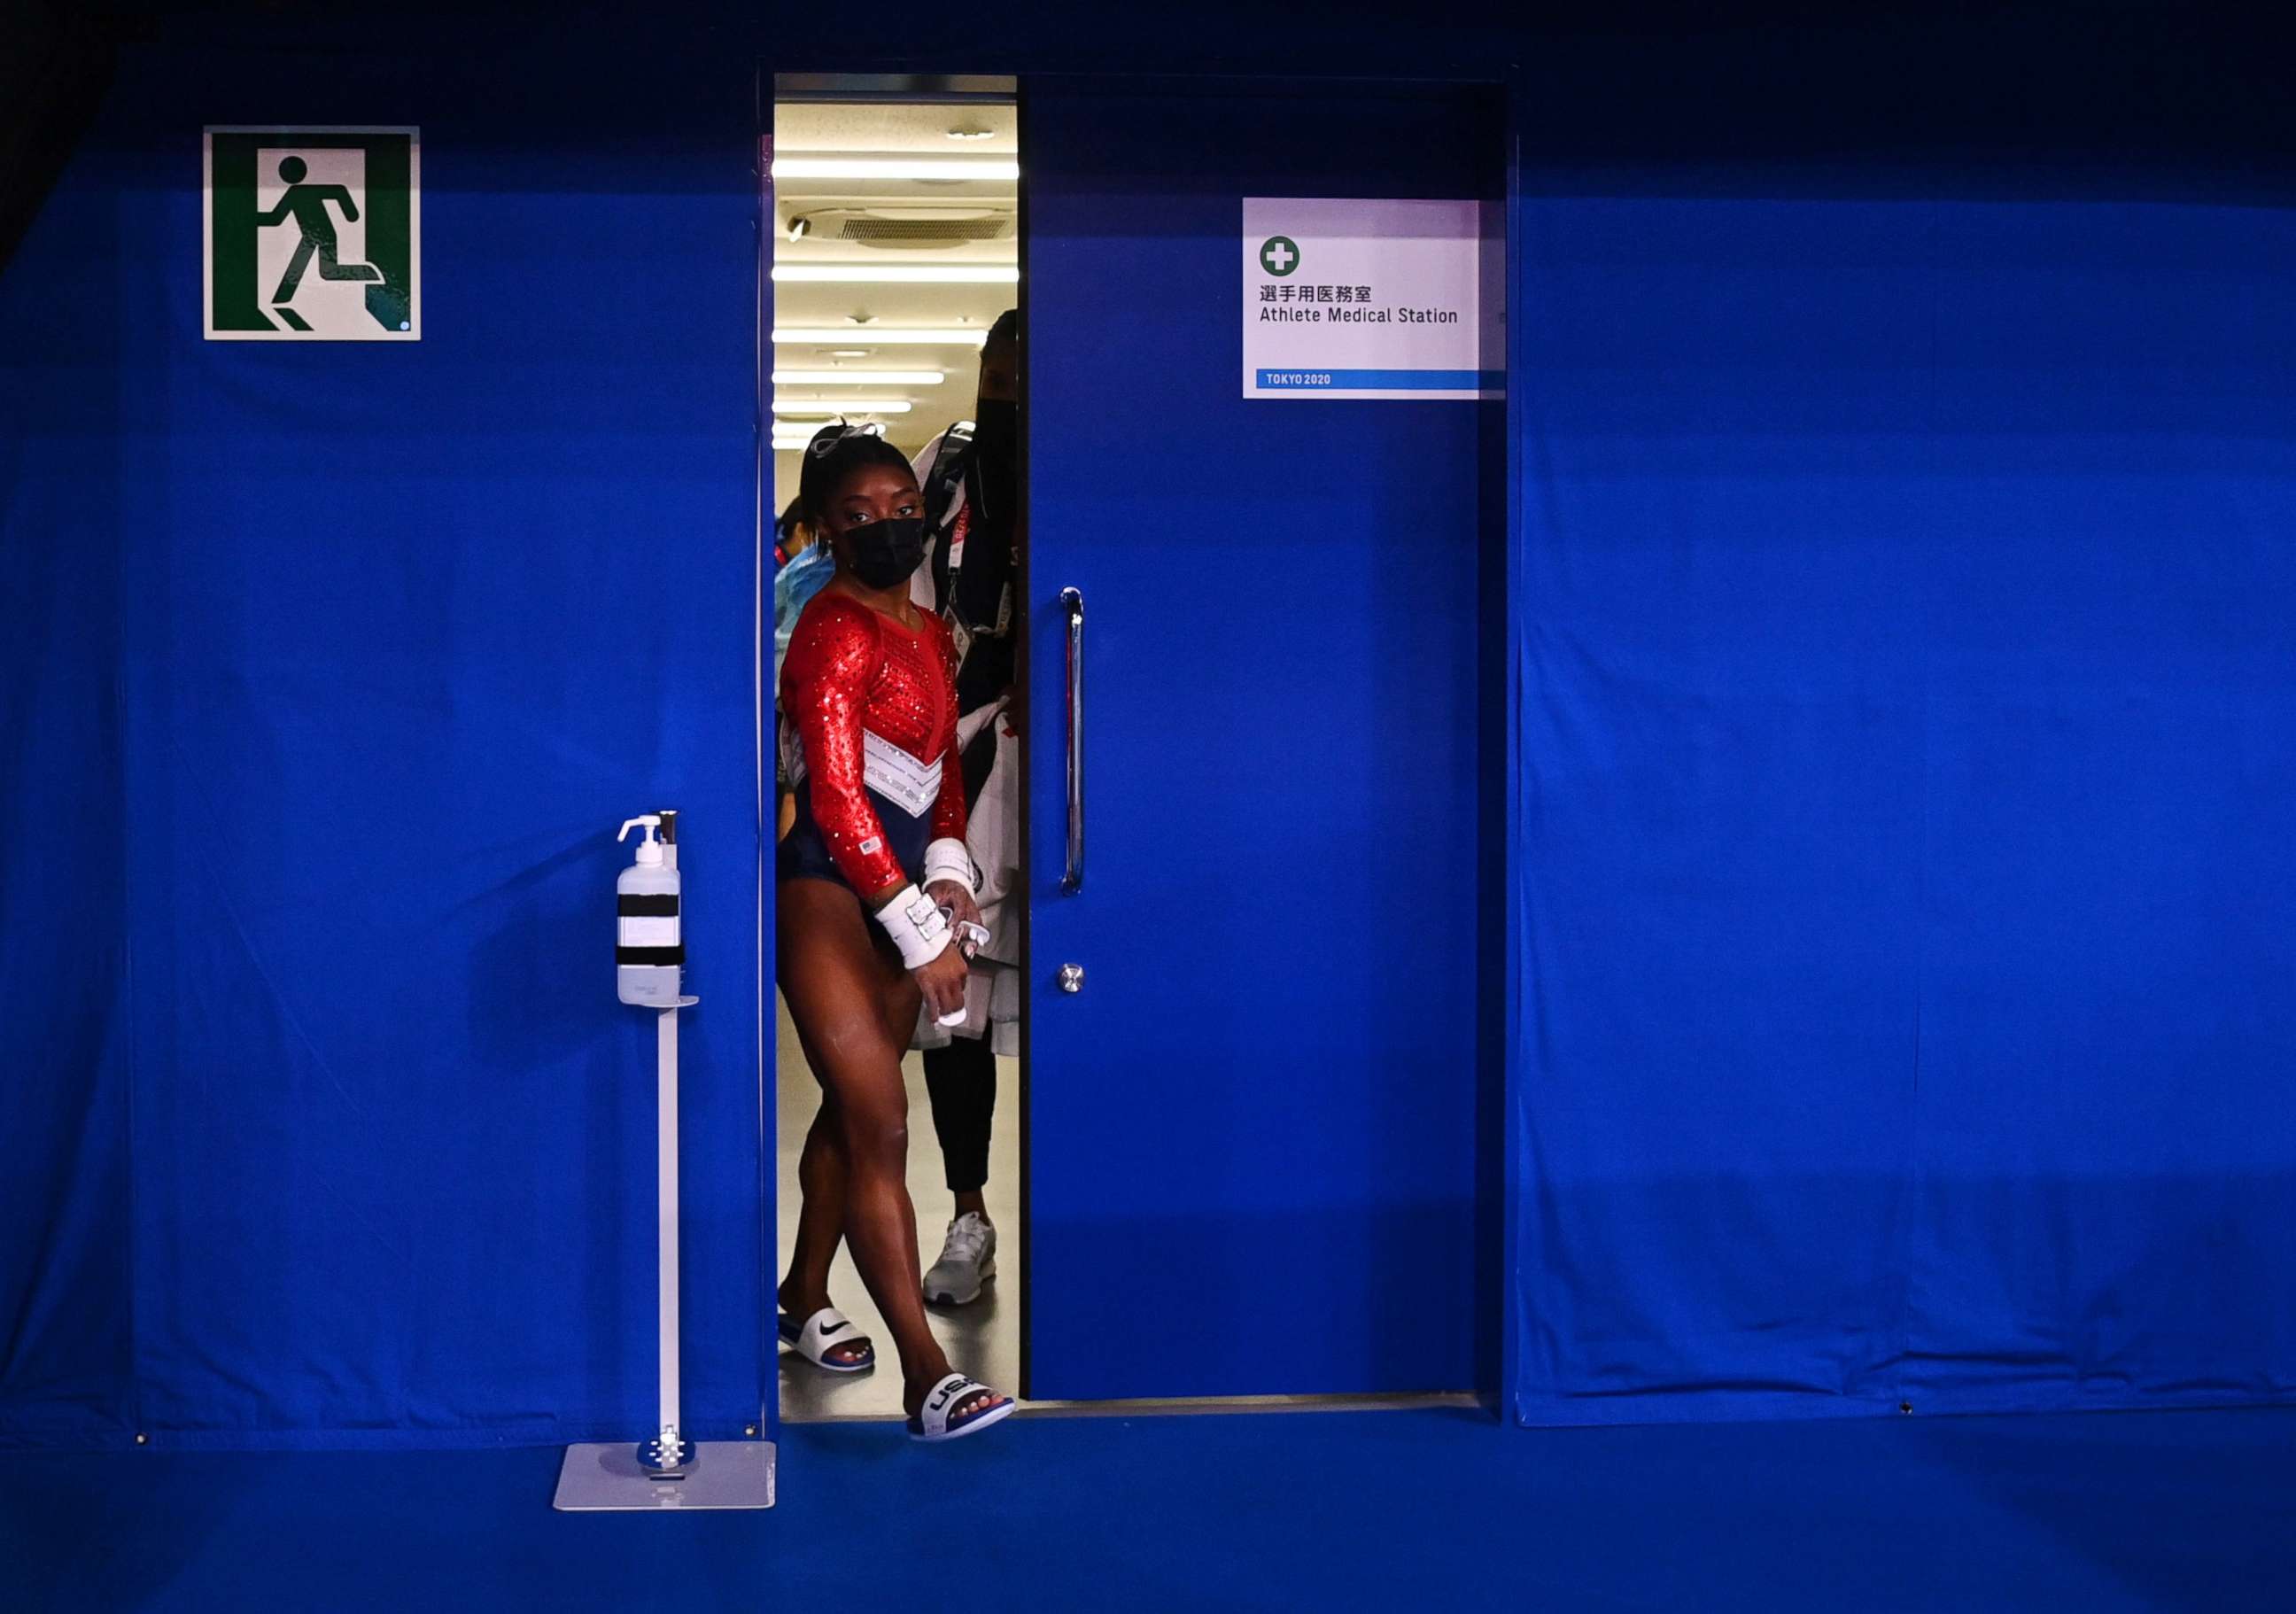 PHOTO: Simone Biles of the United States leaves a medical station during the women's gymnastics team final, July 27, 2021, at the 2020 Summer Olympics in Tokyo.